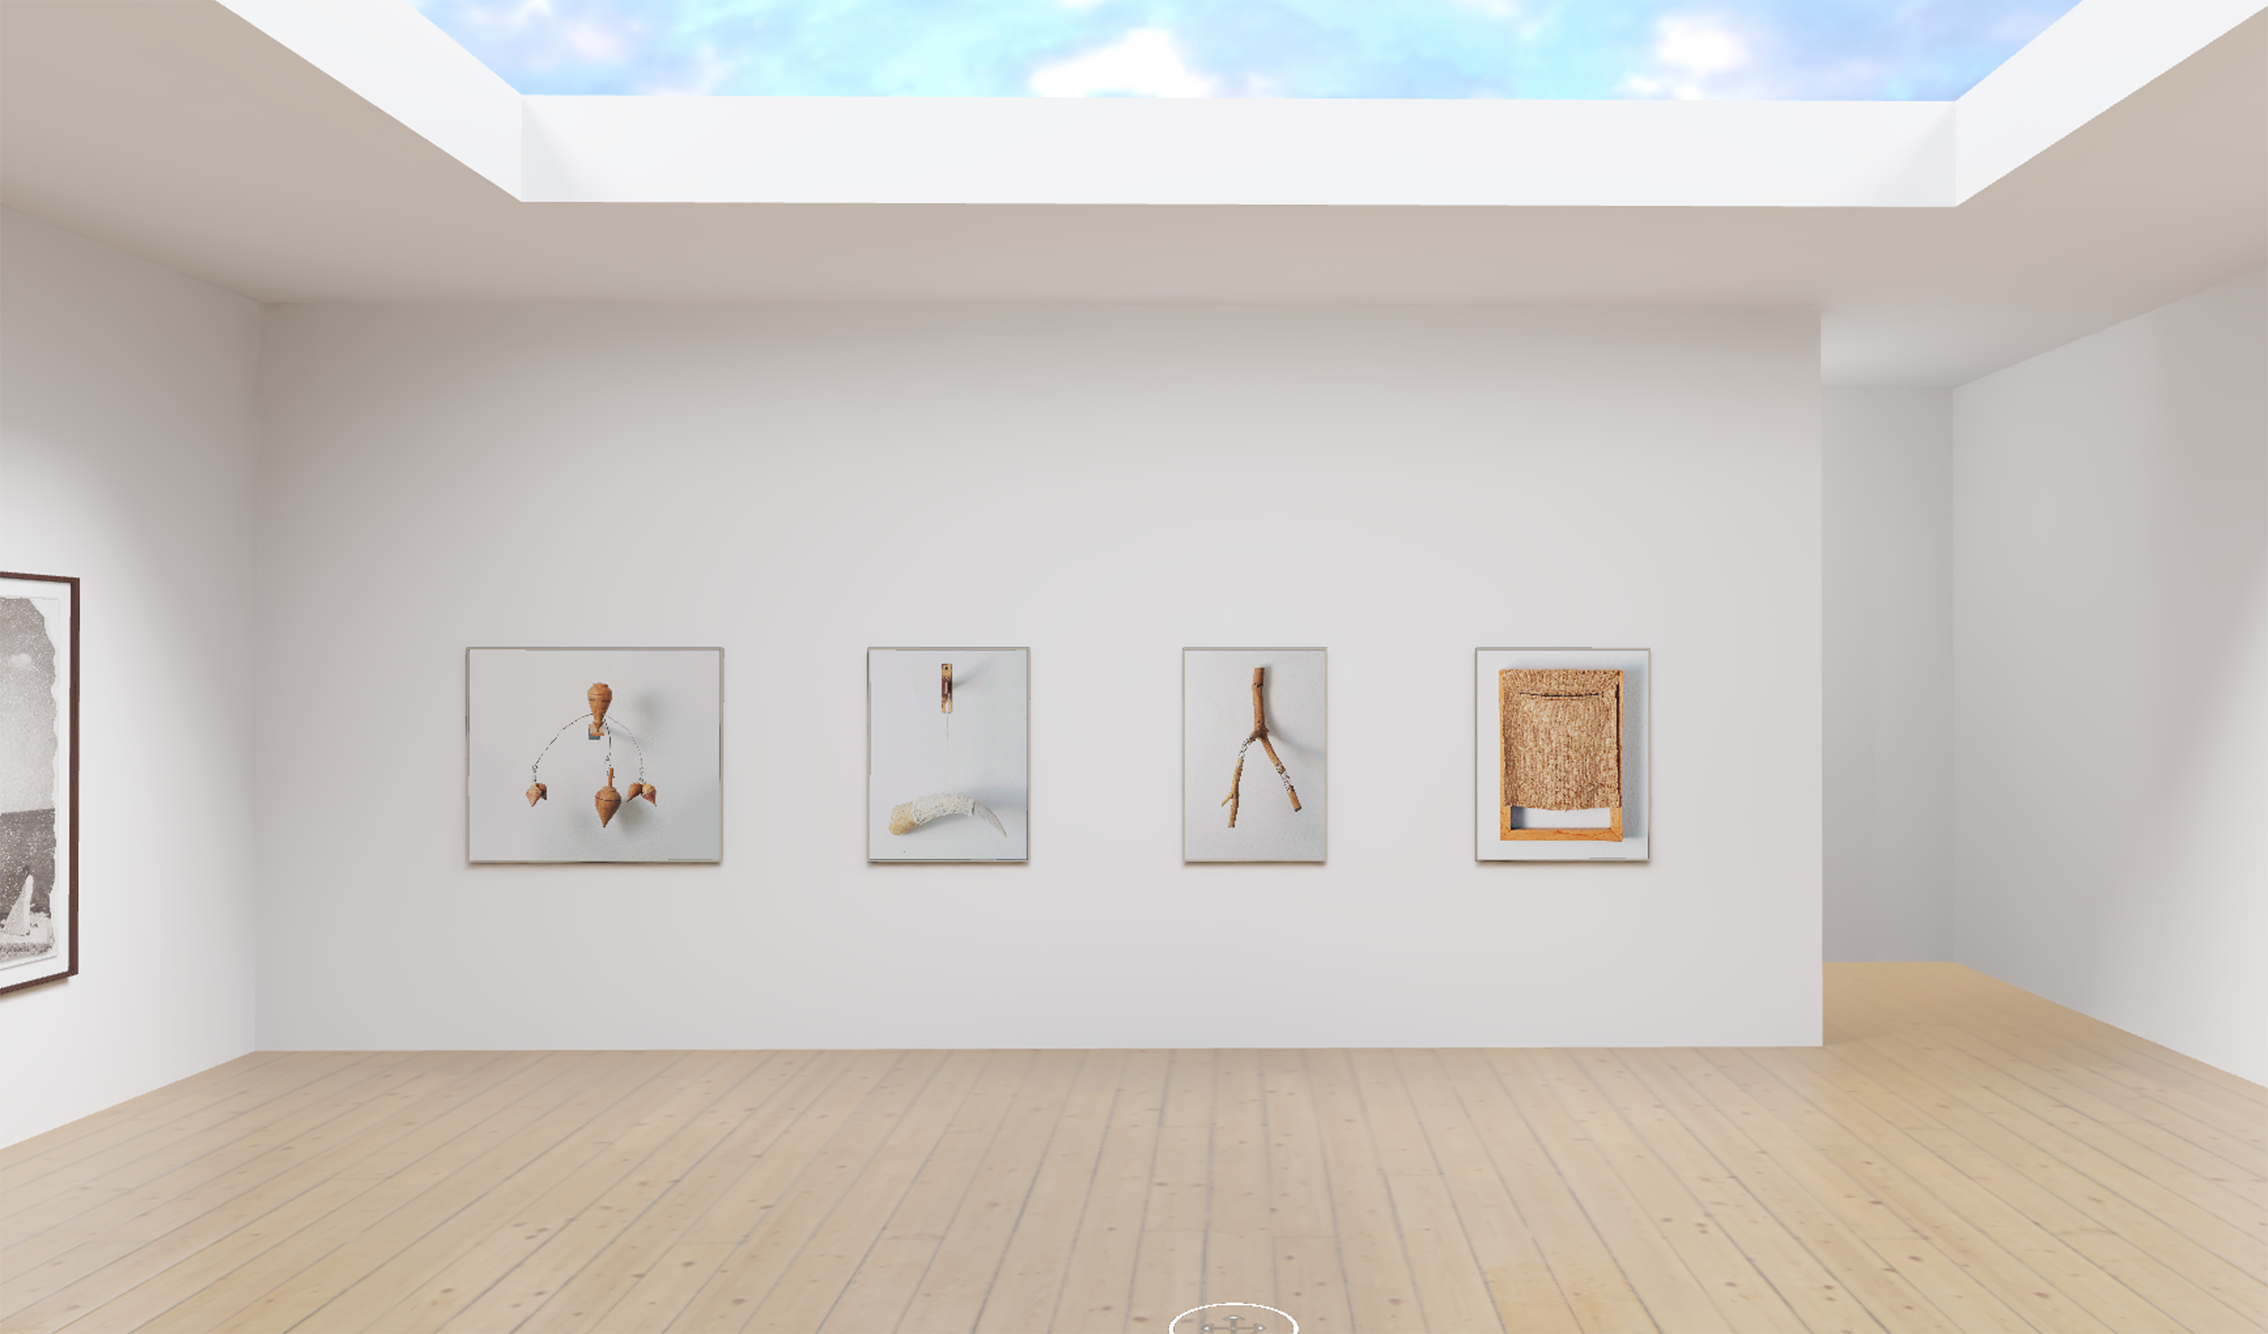 Installation image of an exhibition in a virtual gallery.